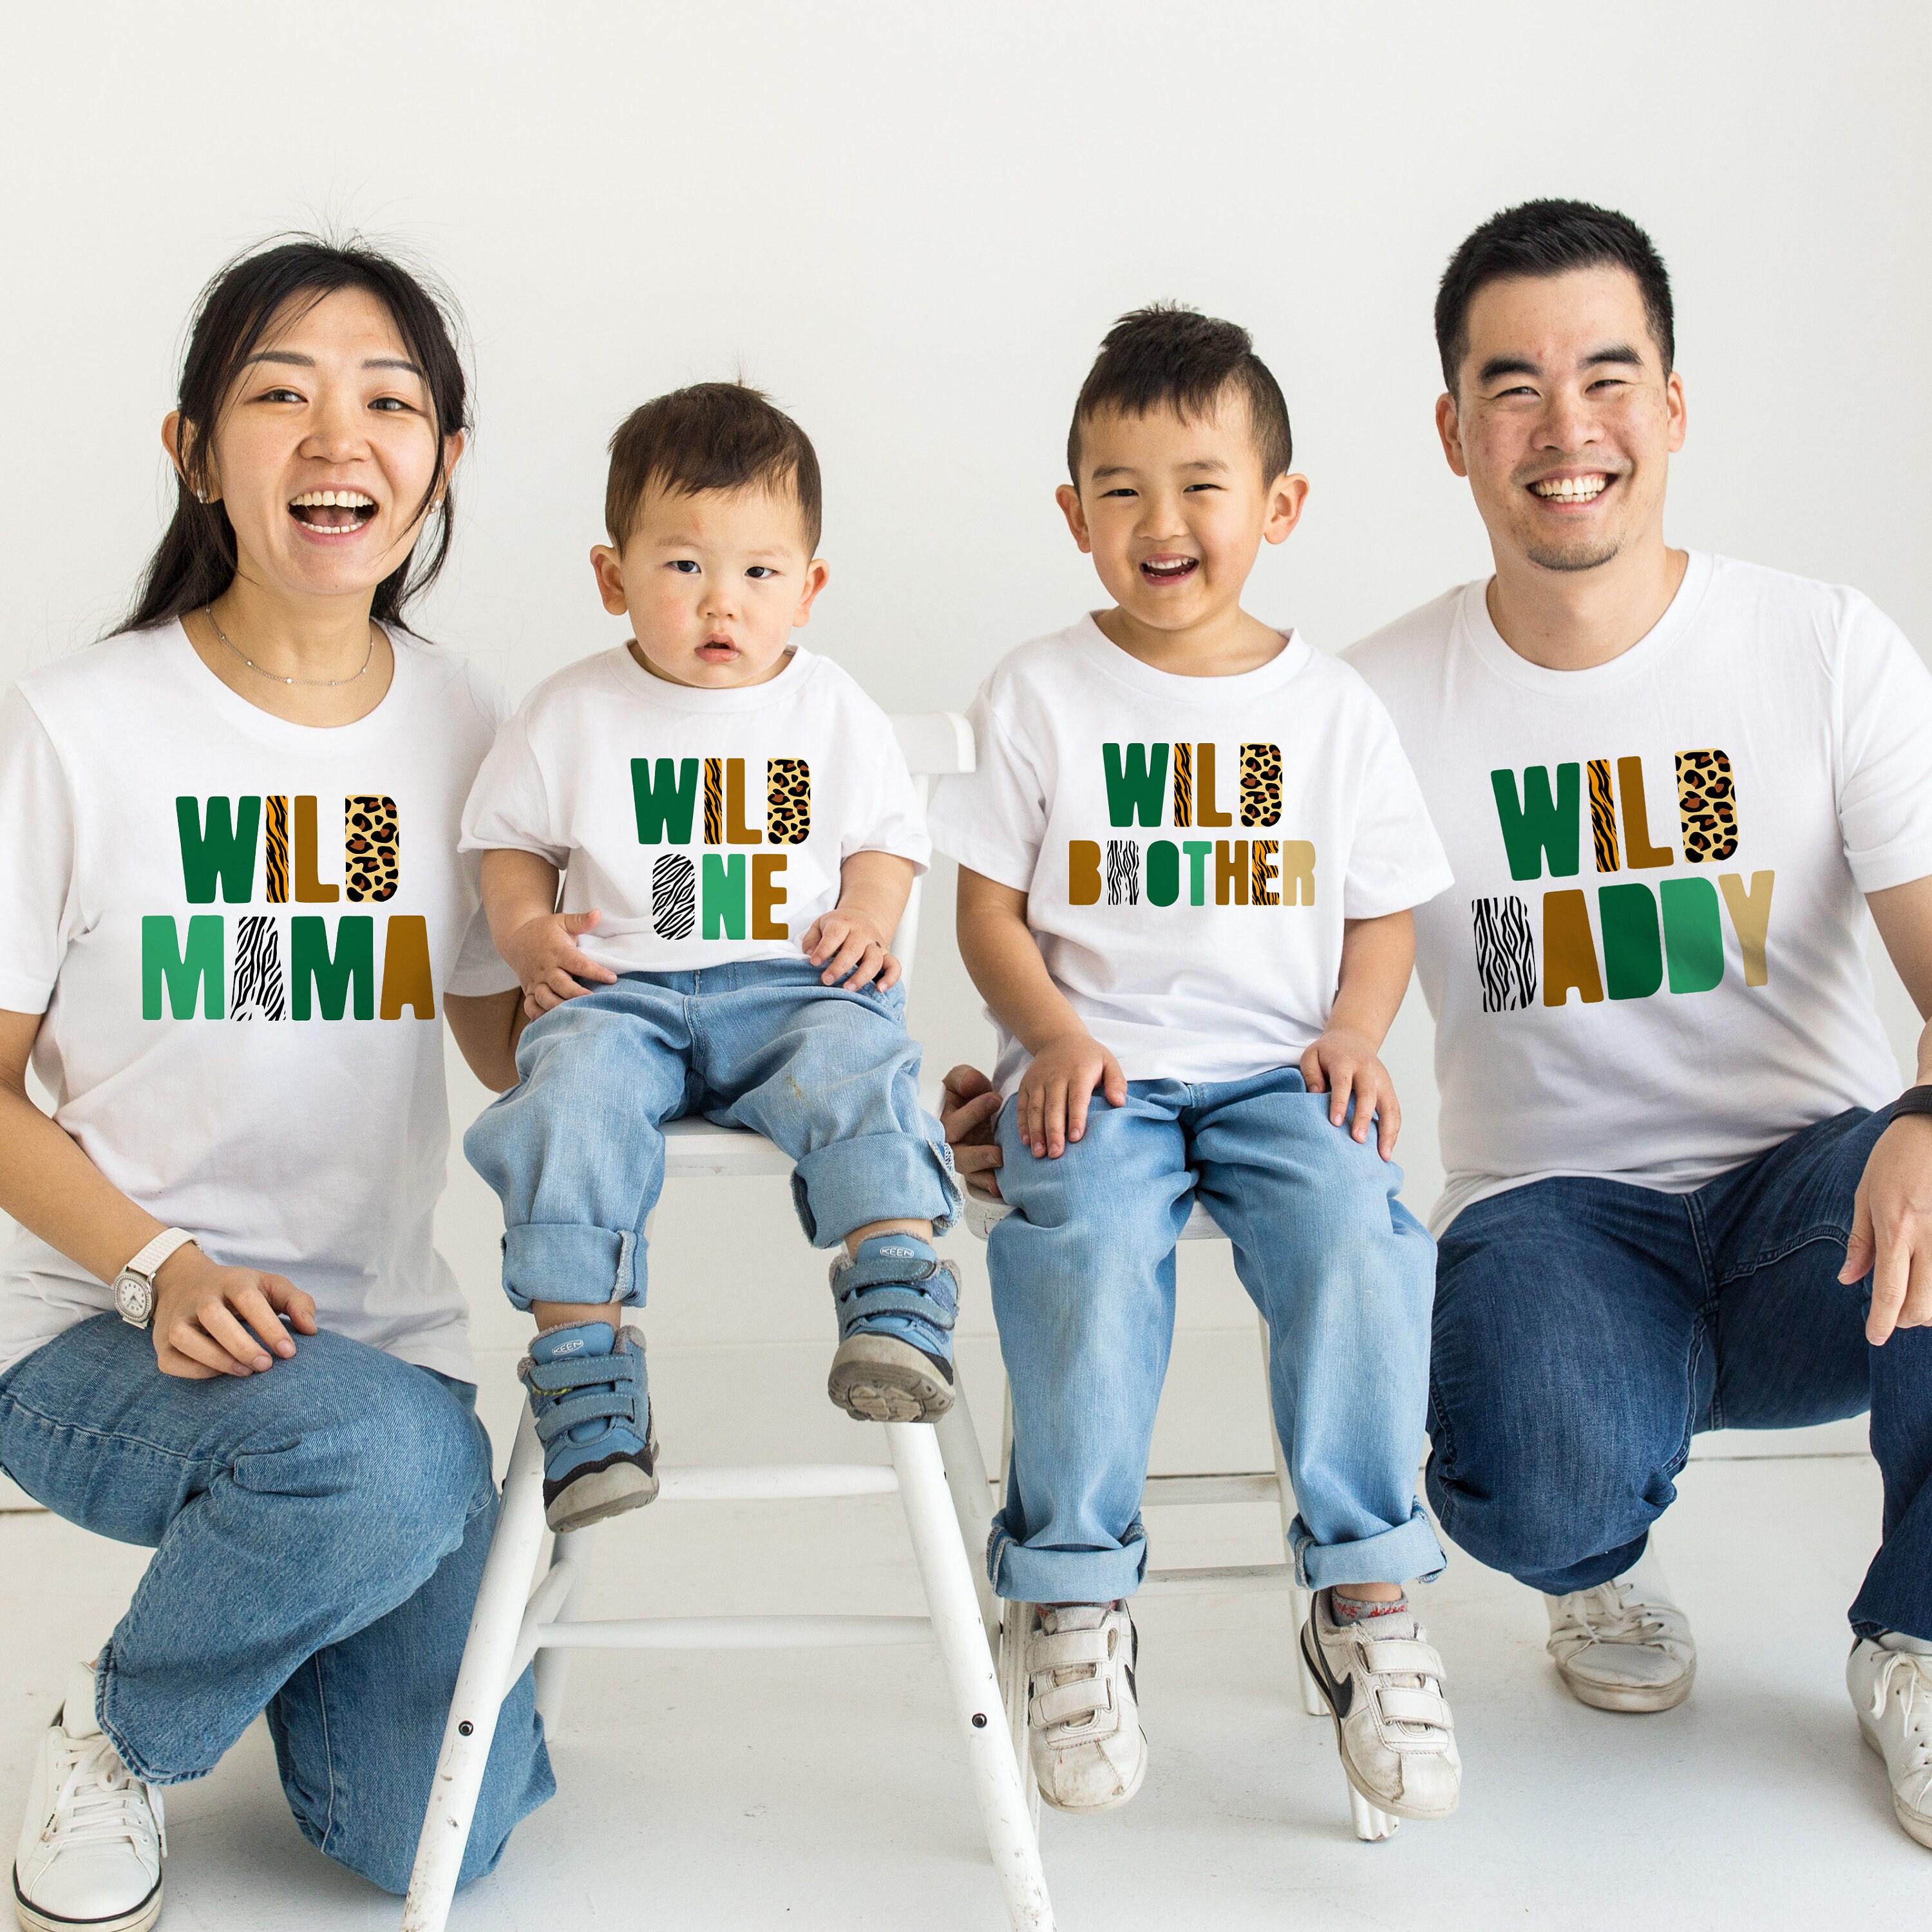 Discover Wild One Birthday family T Shirt, First birthday Onesie, Family Matching wild one shirt, Safari themed first birthday outfit